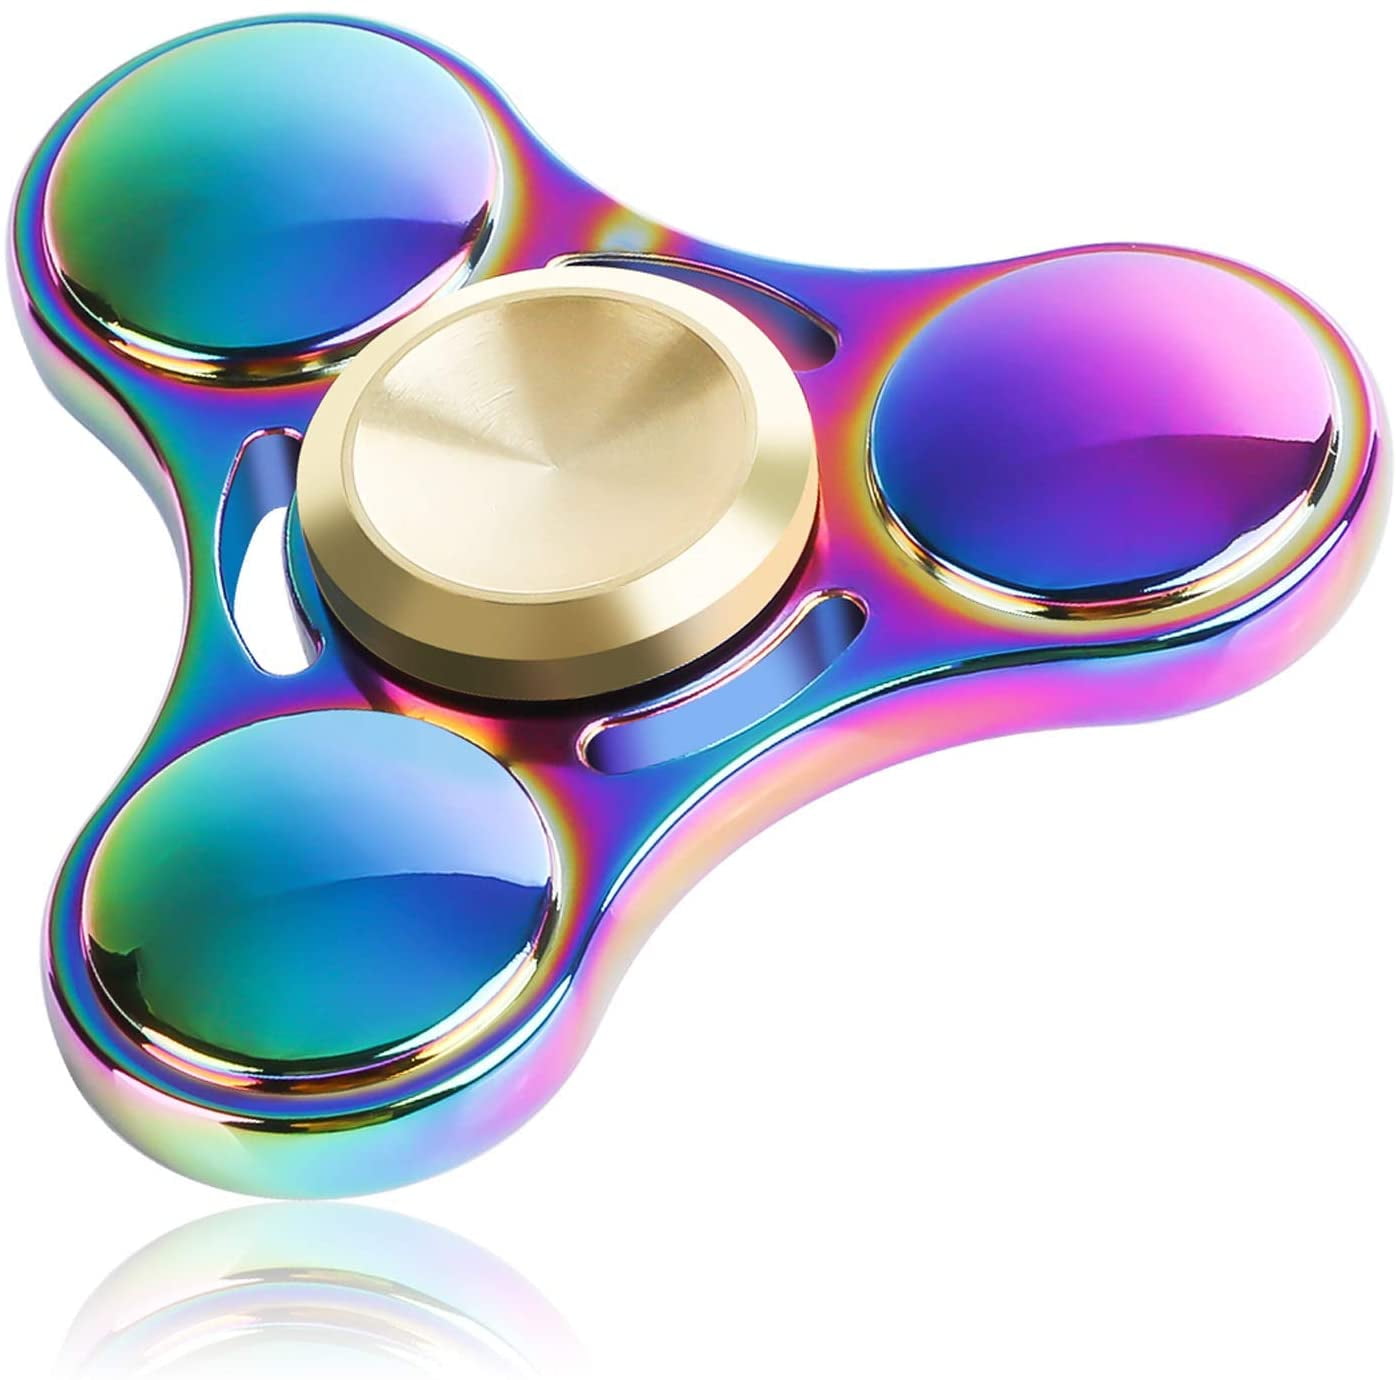 EDC Hand Focus 3D FIDGET SPINNER Ceramic Bearing Gift ADHD Stress Relieves Toys 